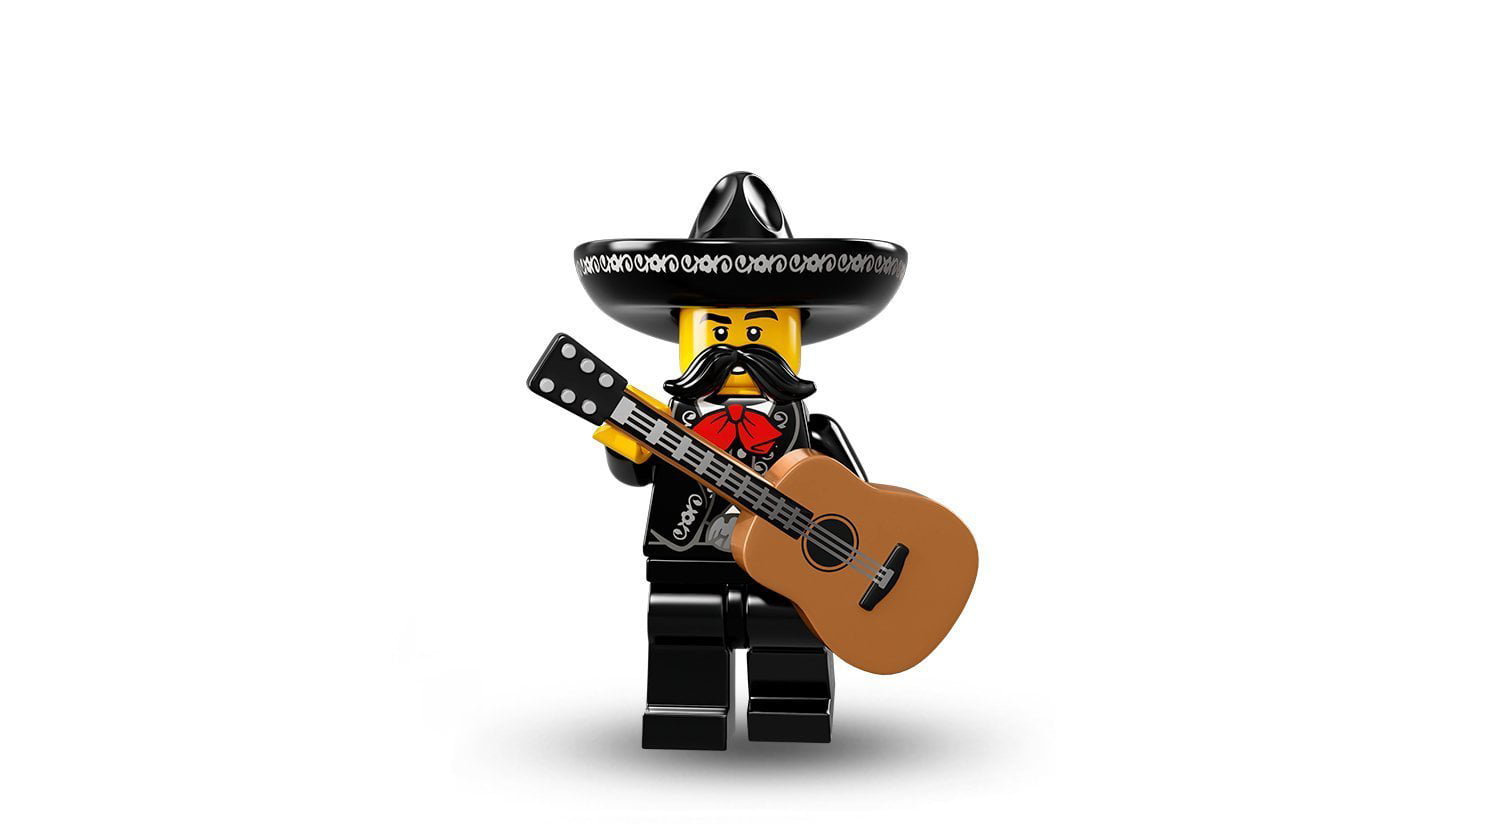 Lego 5 Acoustic Guitar           Minifigure Not Included    Band Music Series